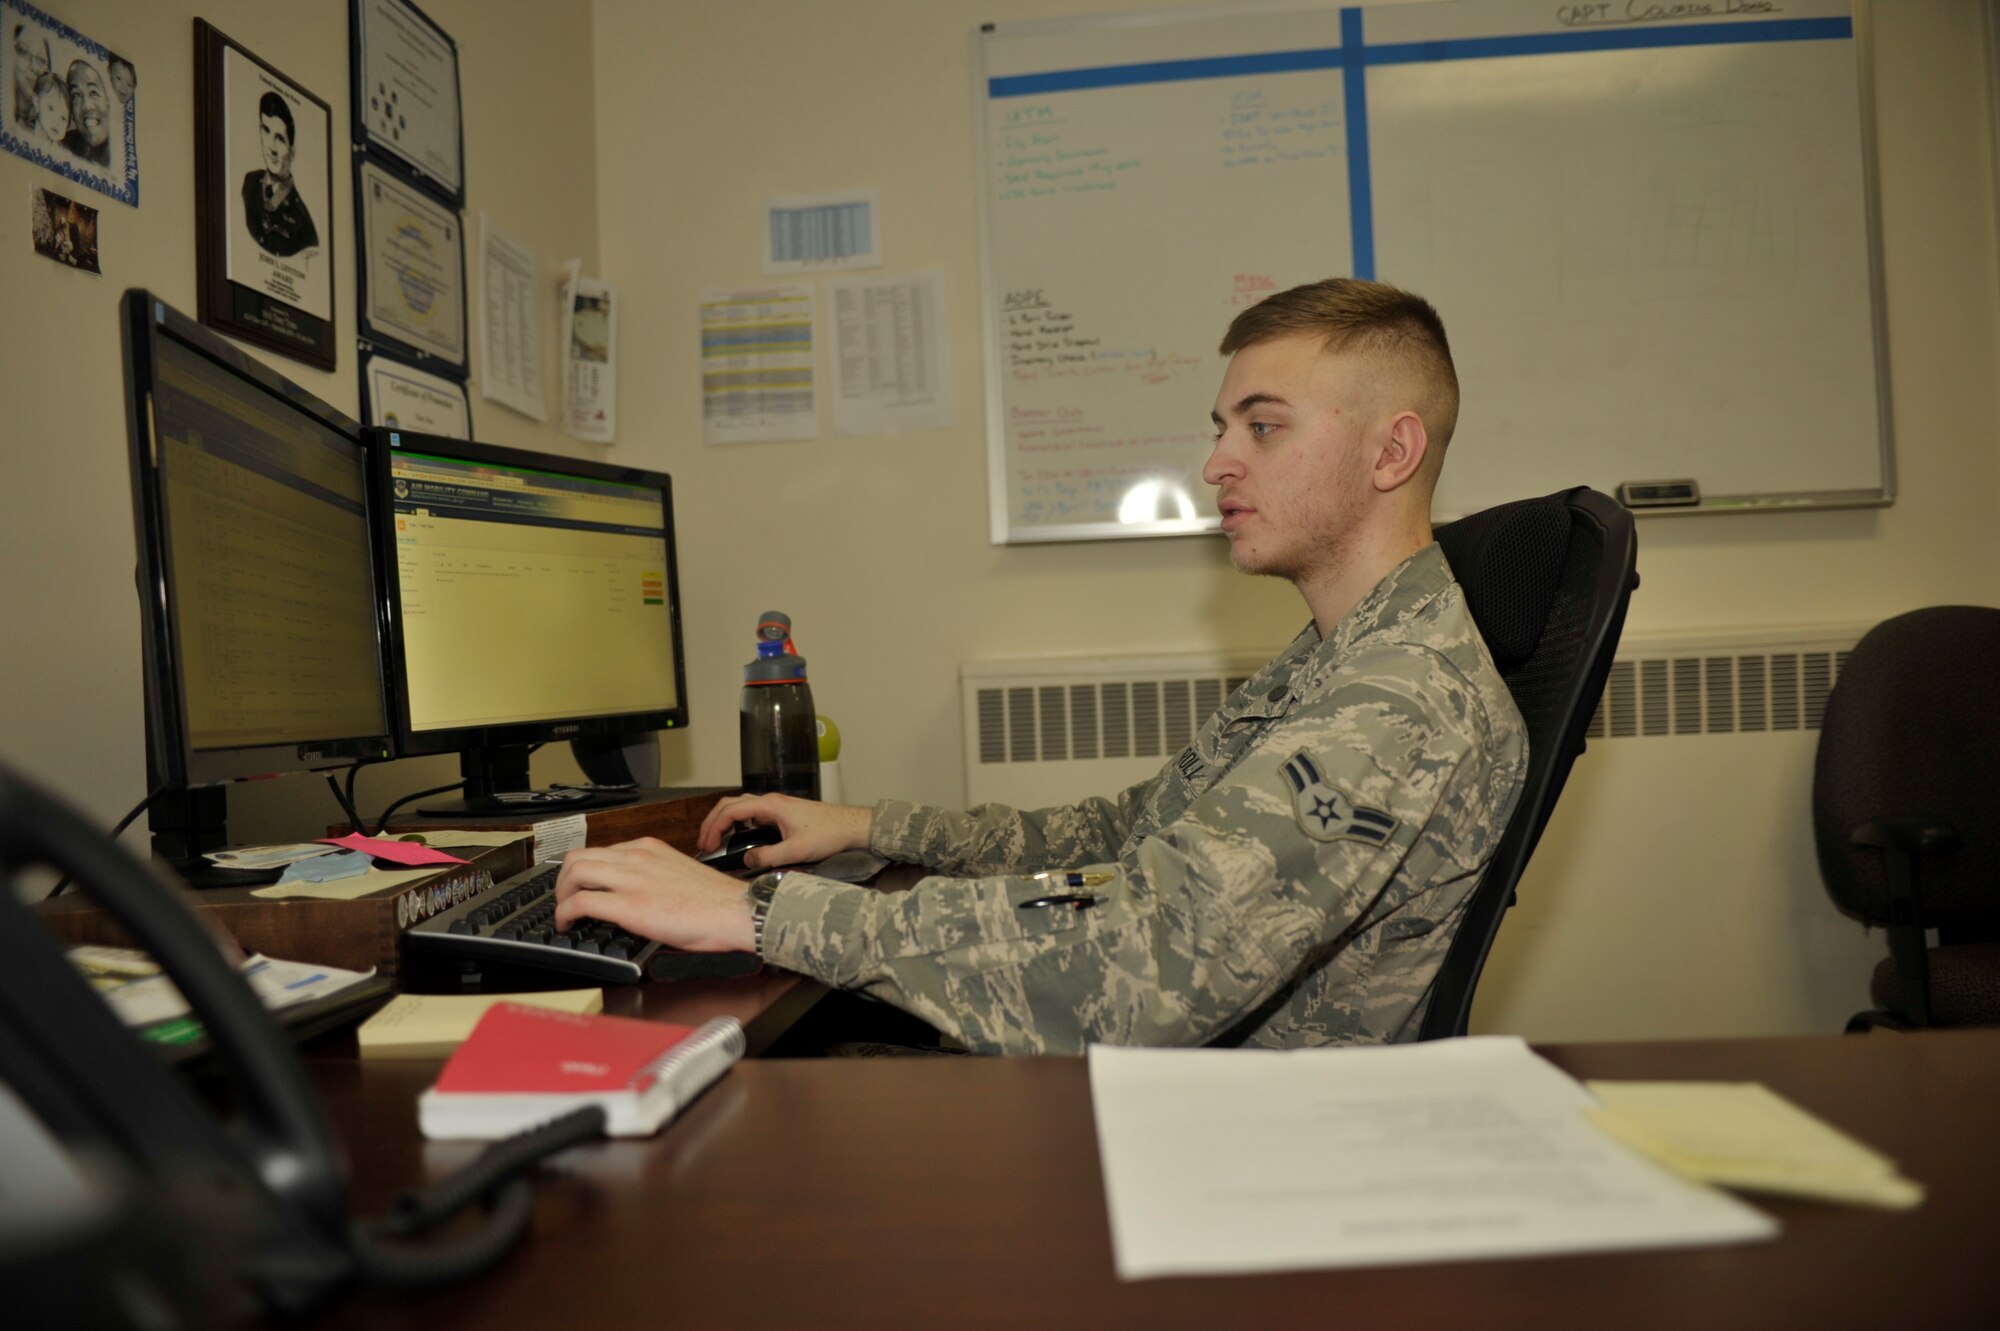 Airman 1st Class Joseph Carroll, 92nd Communications Squadron knowledge manager, gives a customer permission to Tasks Management Tool (TMT) Feb. 13, 2015, Fairchild Air Force Base, Wash. TMT is used from headquarters all the way down to the squadron level to electronically route tasks, streamlining administrative processes and saving on paper and printing costs. (U.S. Air Force photo/Airman 1st Class Taylor Bourgeous) 